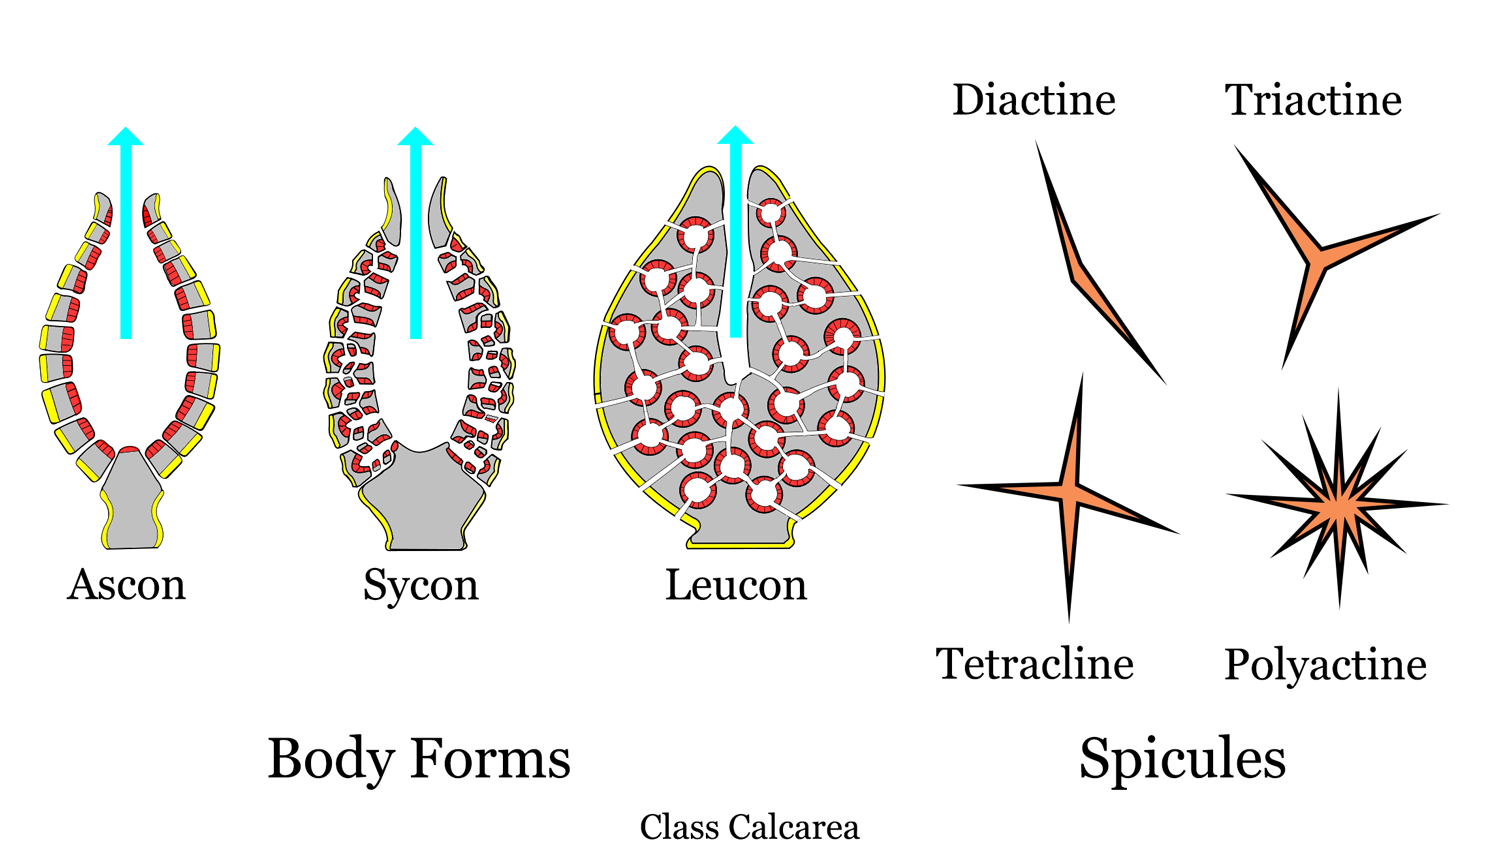 Diagram of Calcarea body plans and spicules